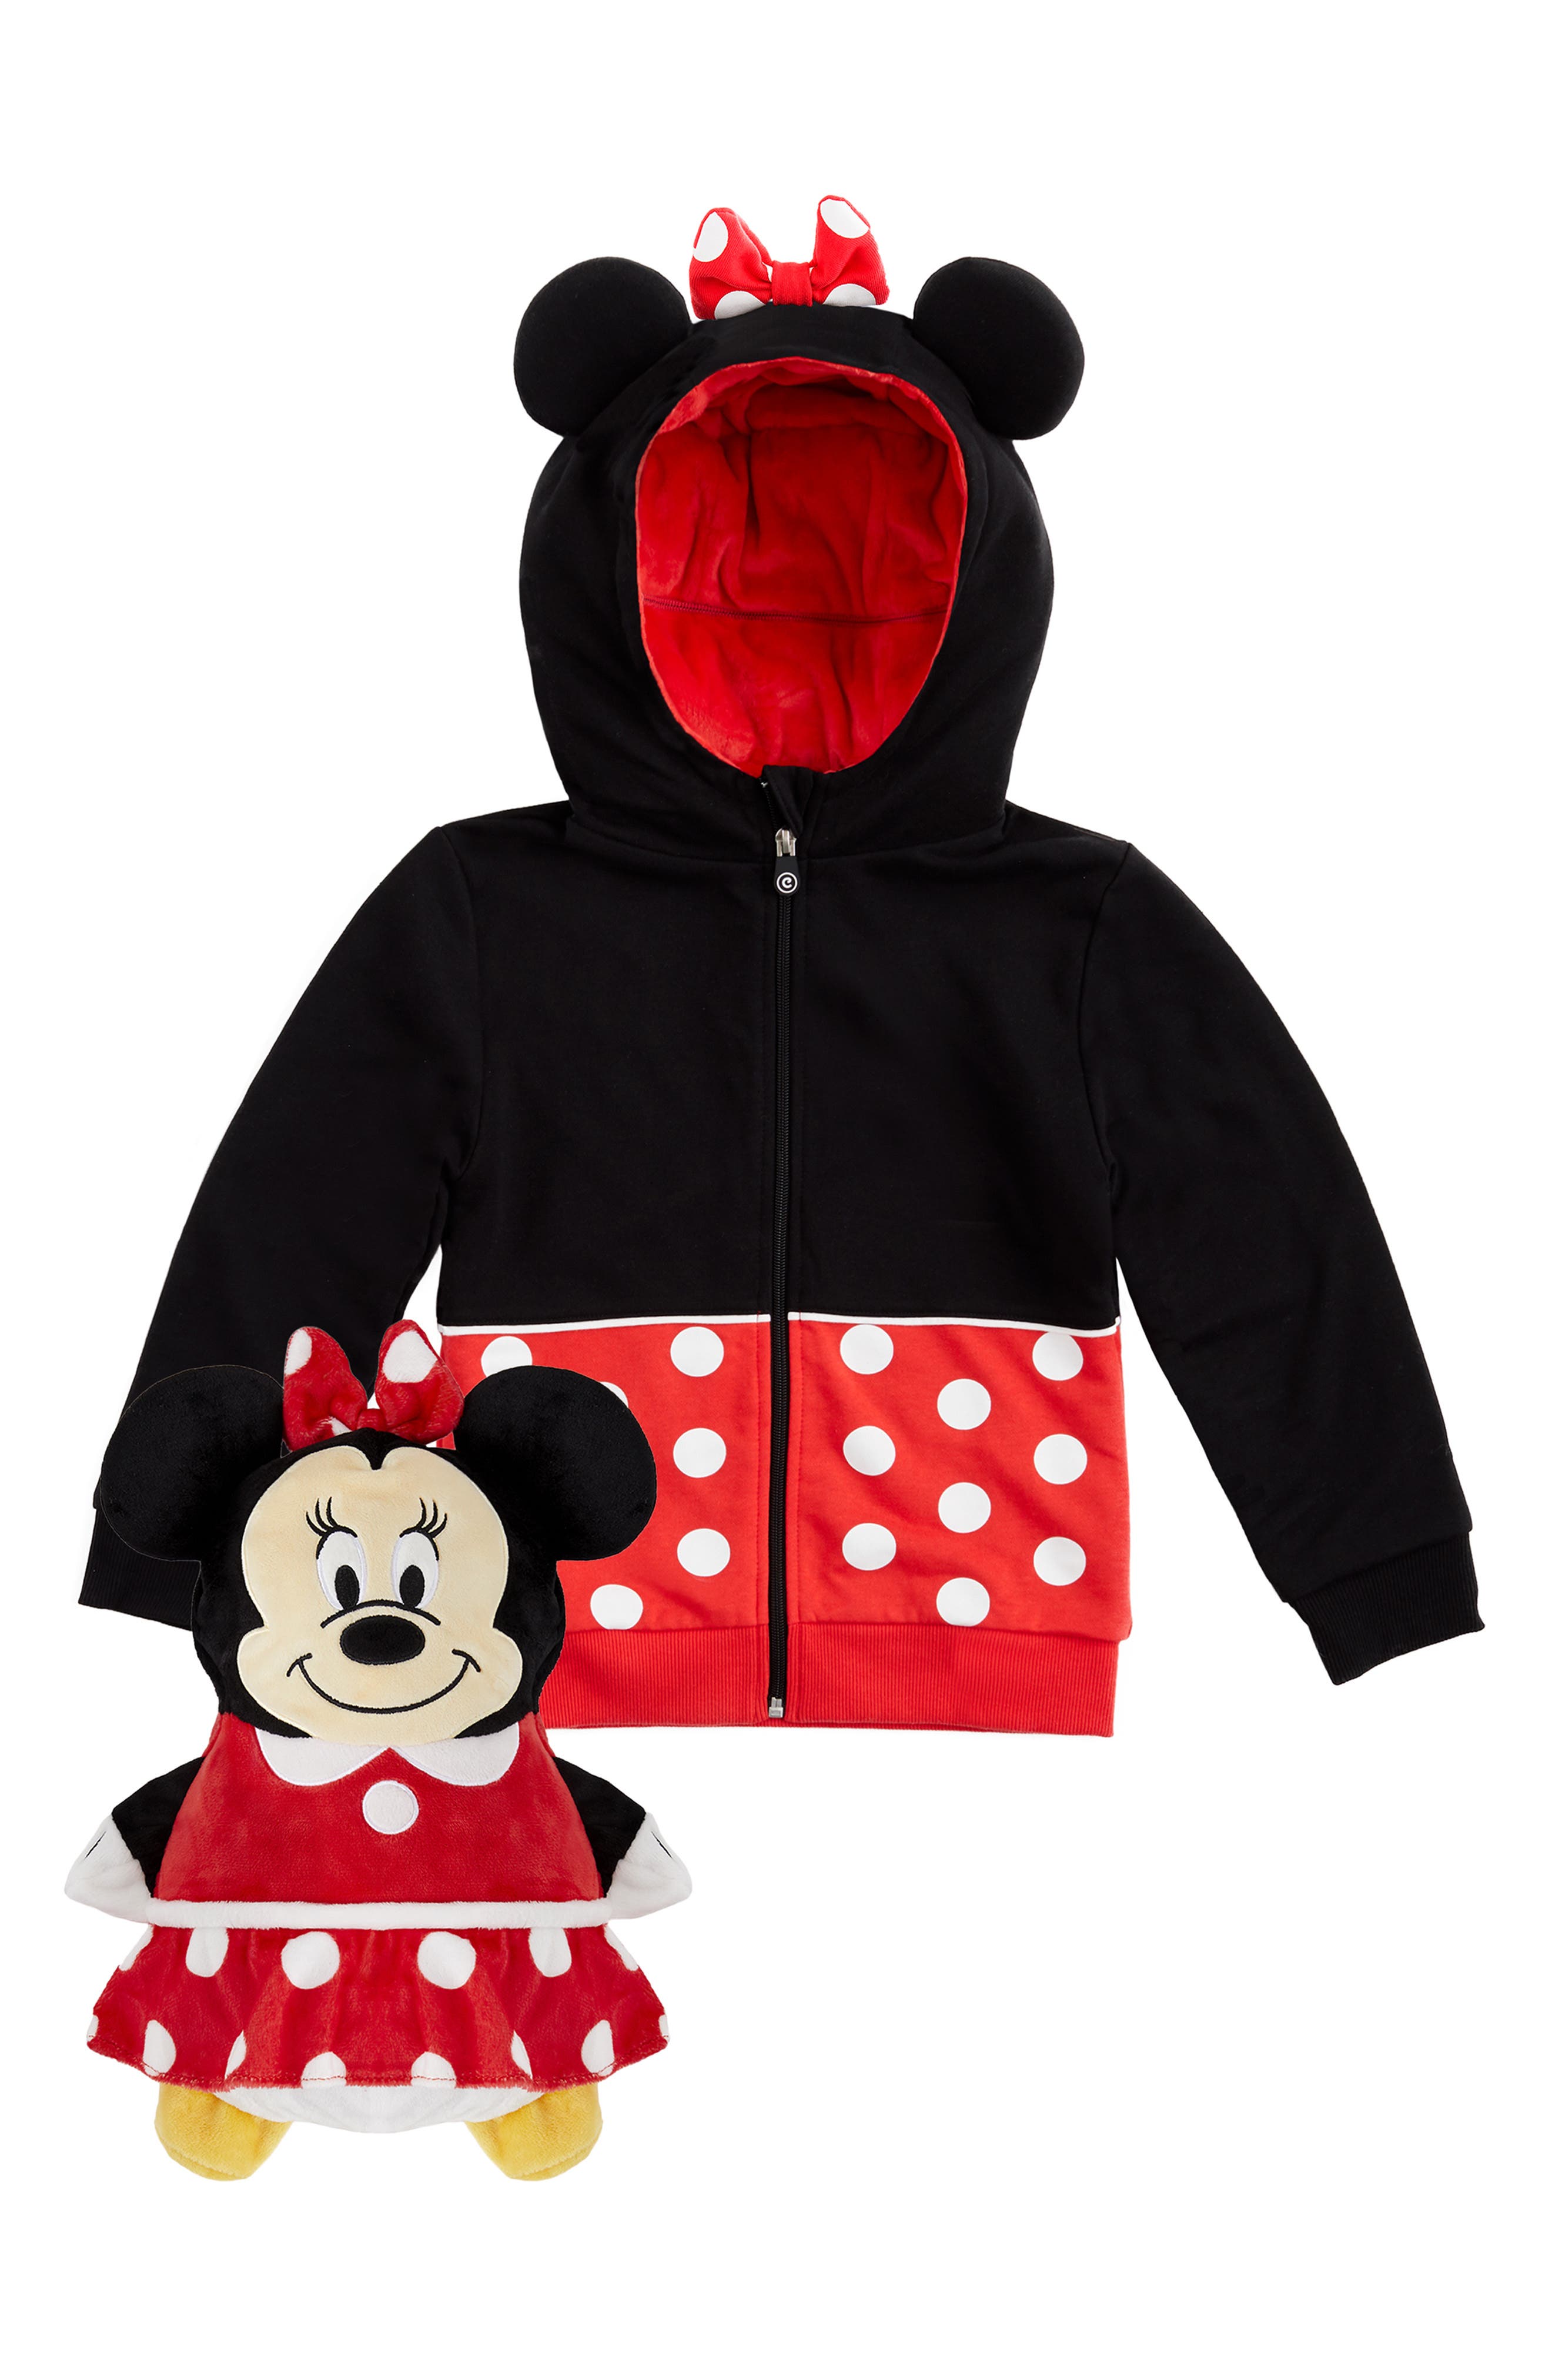 Cubcoats Disney Minnie Mouse 2-in-1 